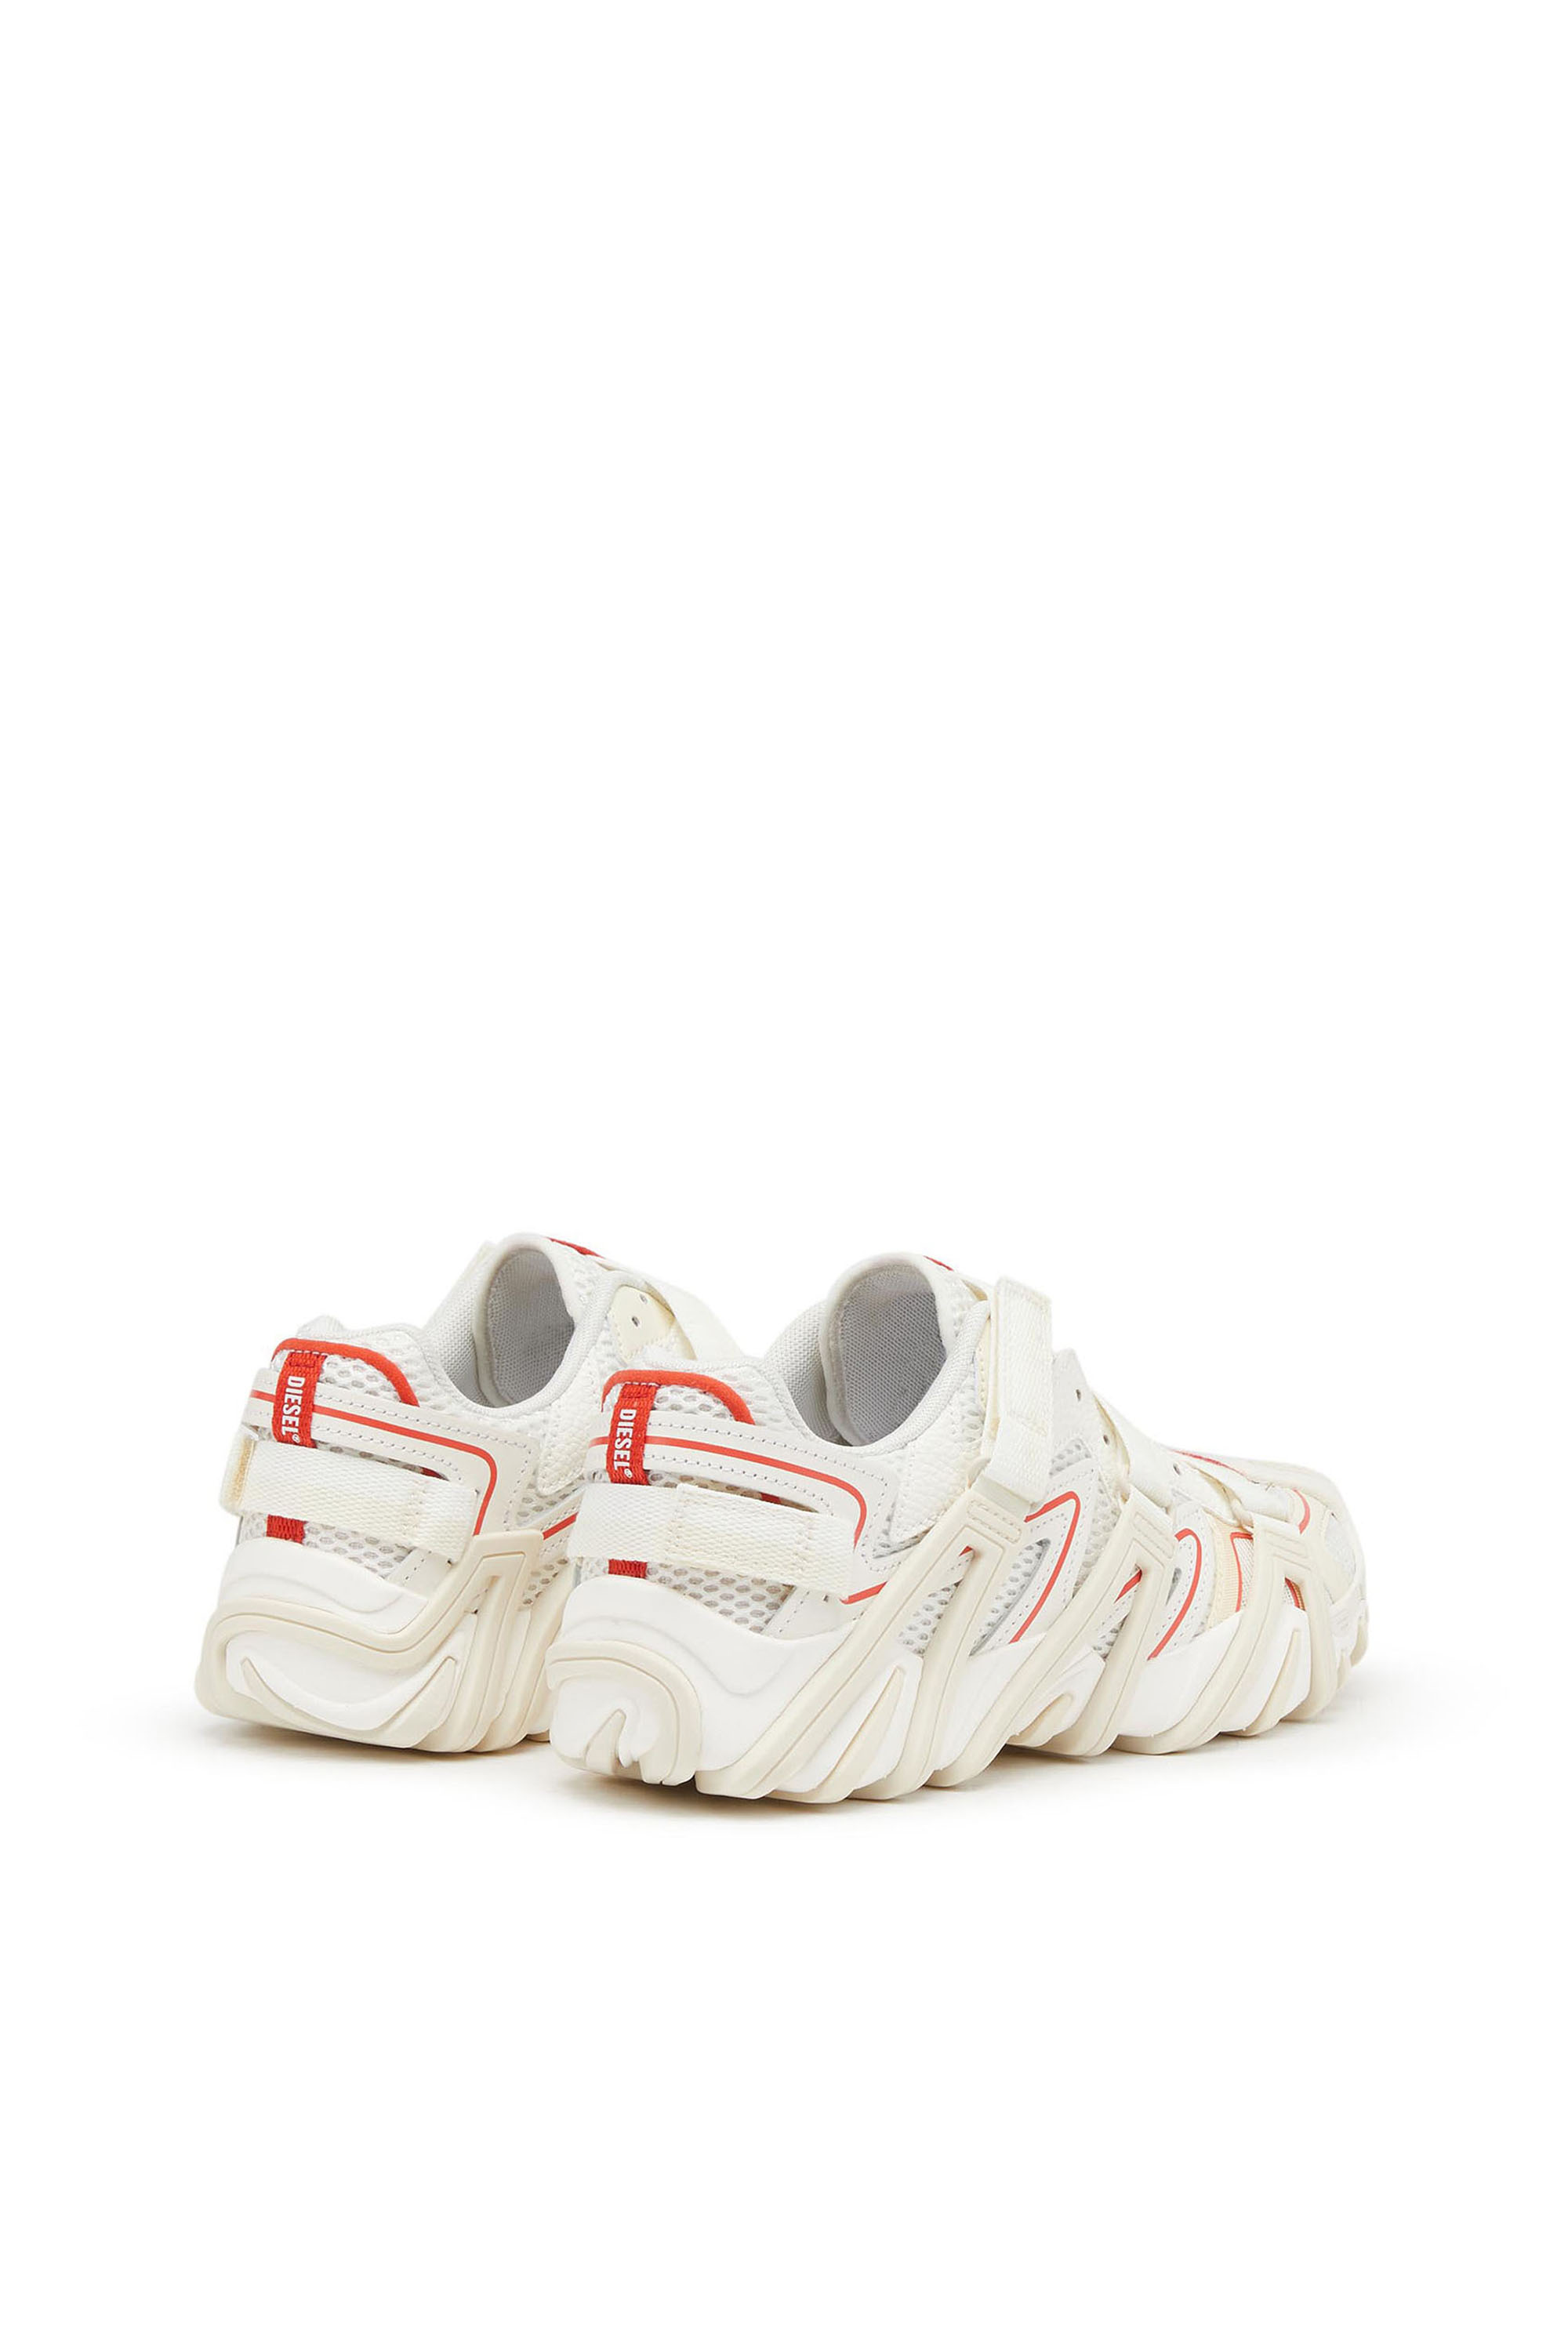 Diesel - S-PROTOTYPE-CR  W, Woman S-Prototype-CR  W - Cage sneakers in mesh and leather in Multicolor - Image 4